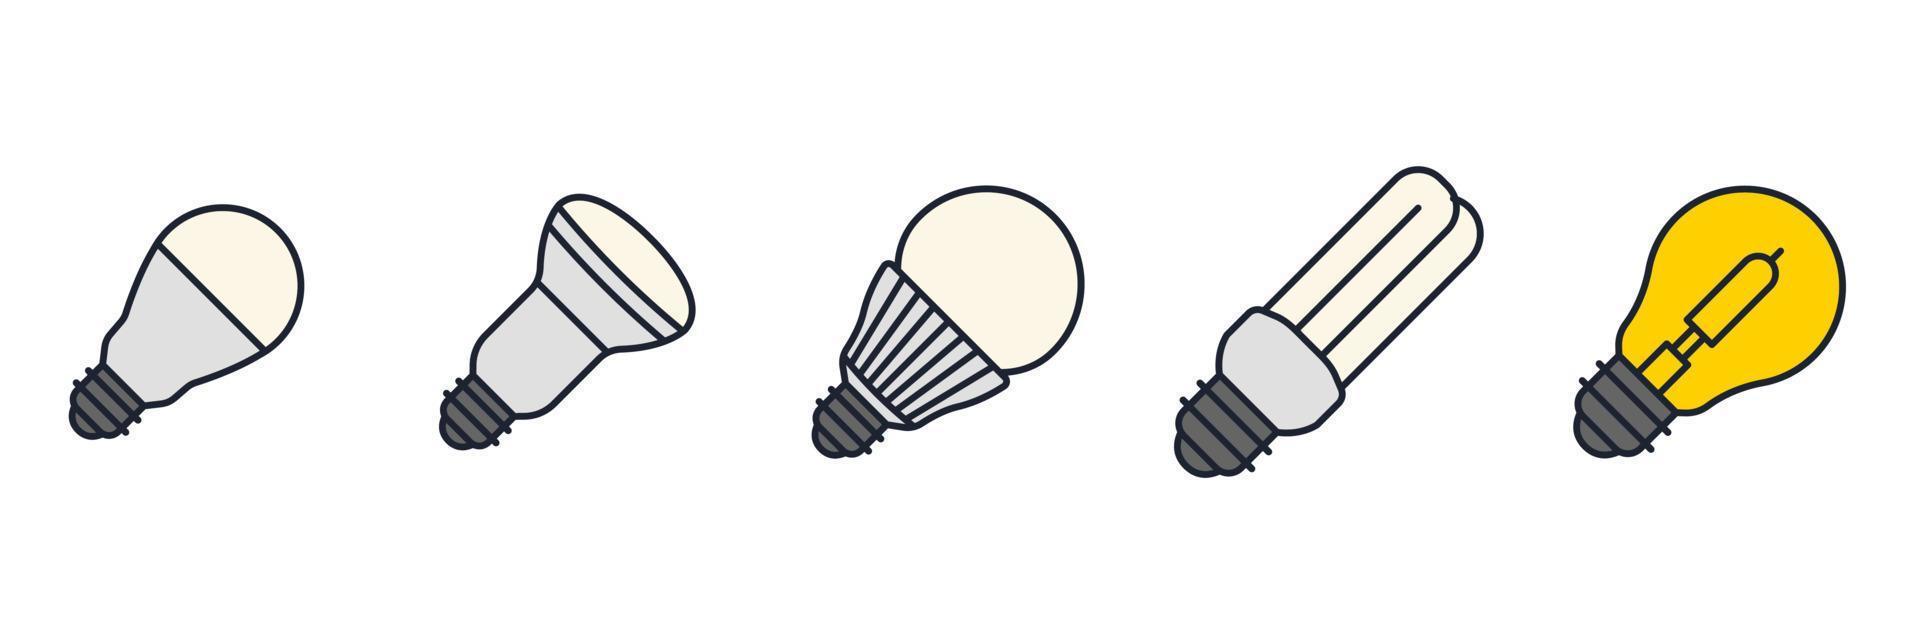 Light Bulb set icon symbol template for graphic and web design collection logo vector illustration